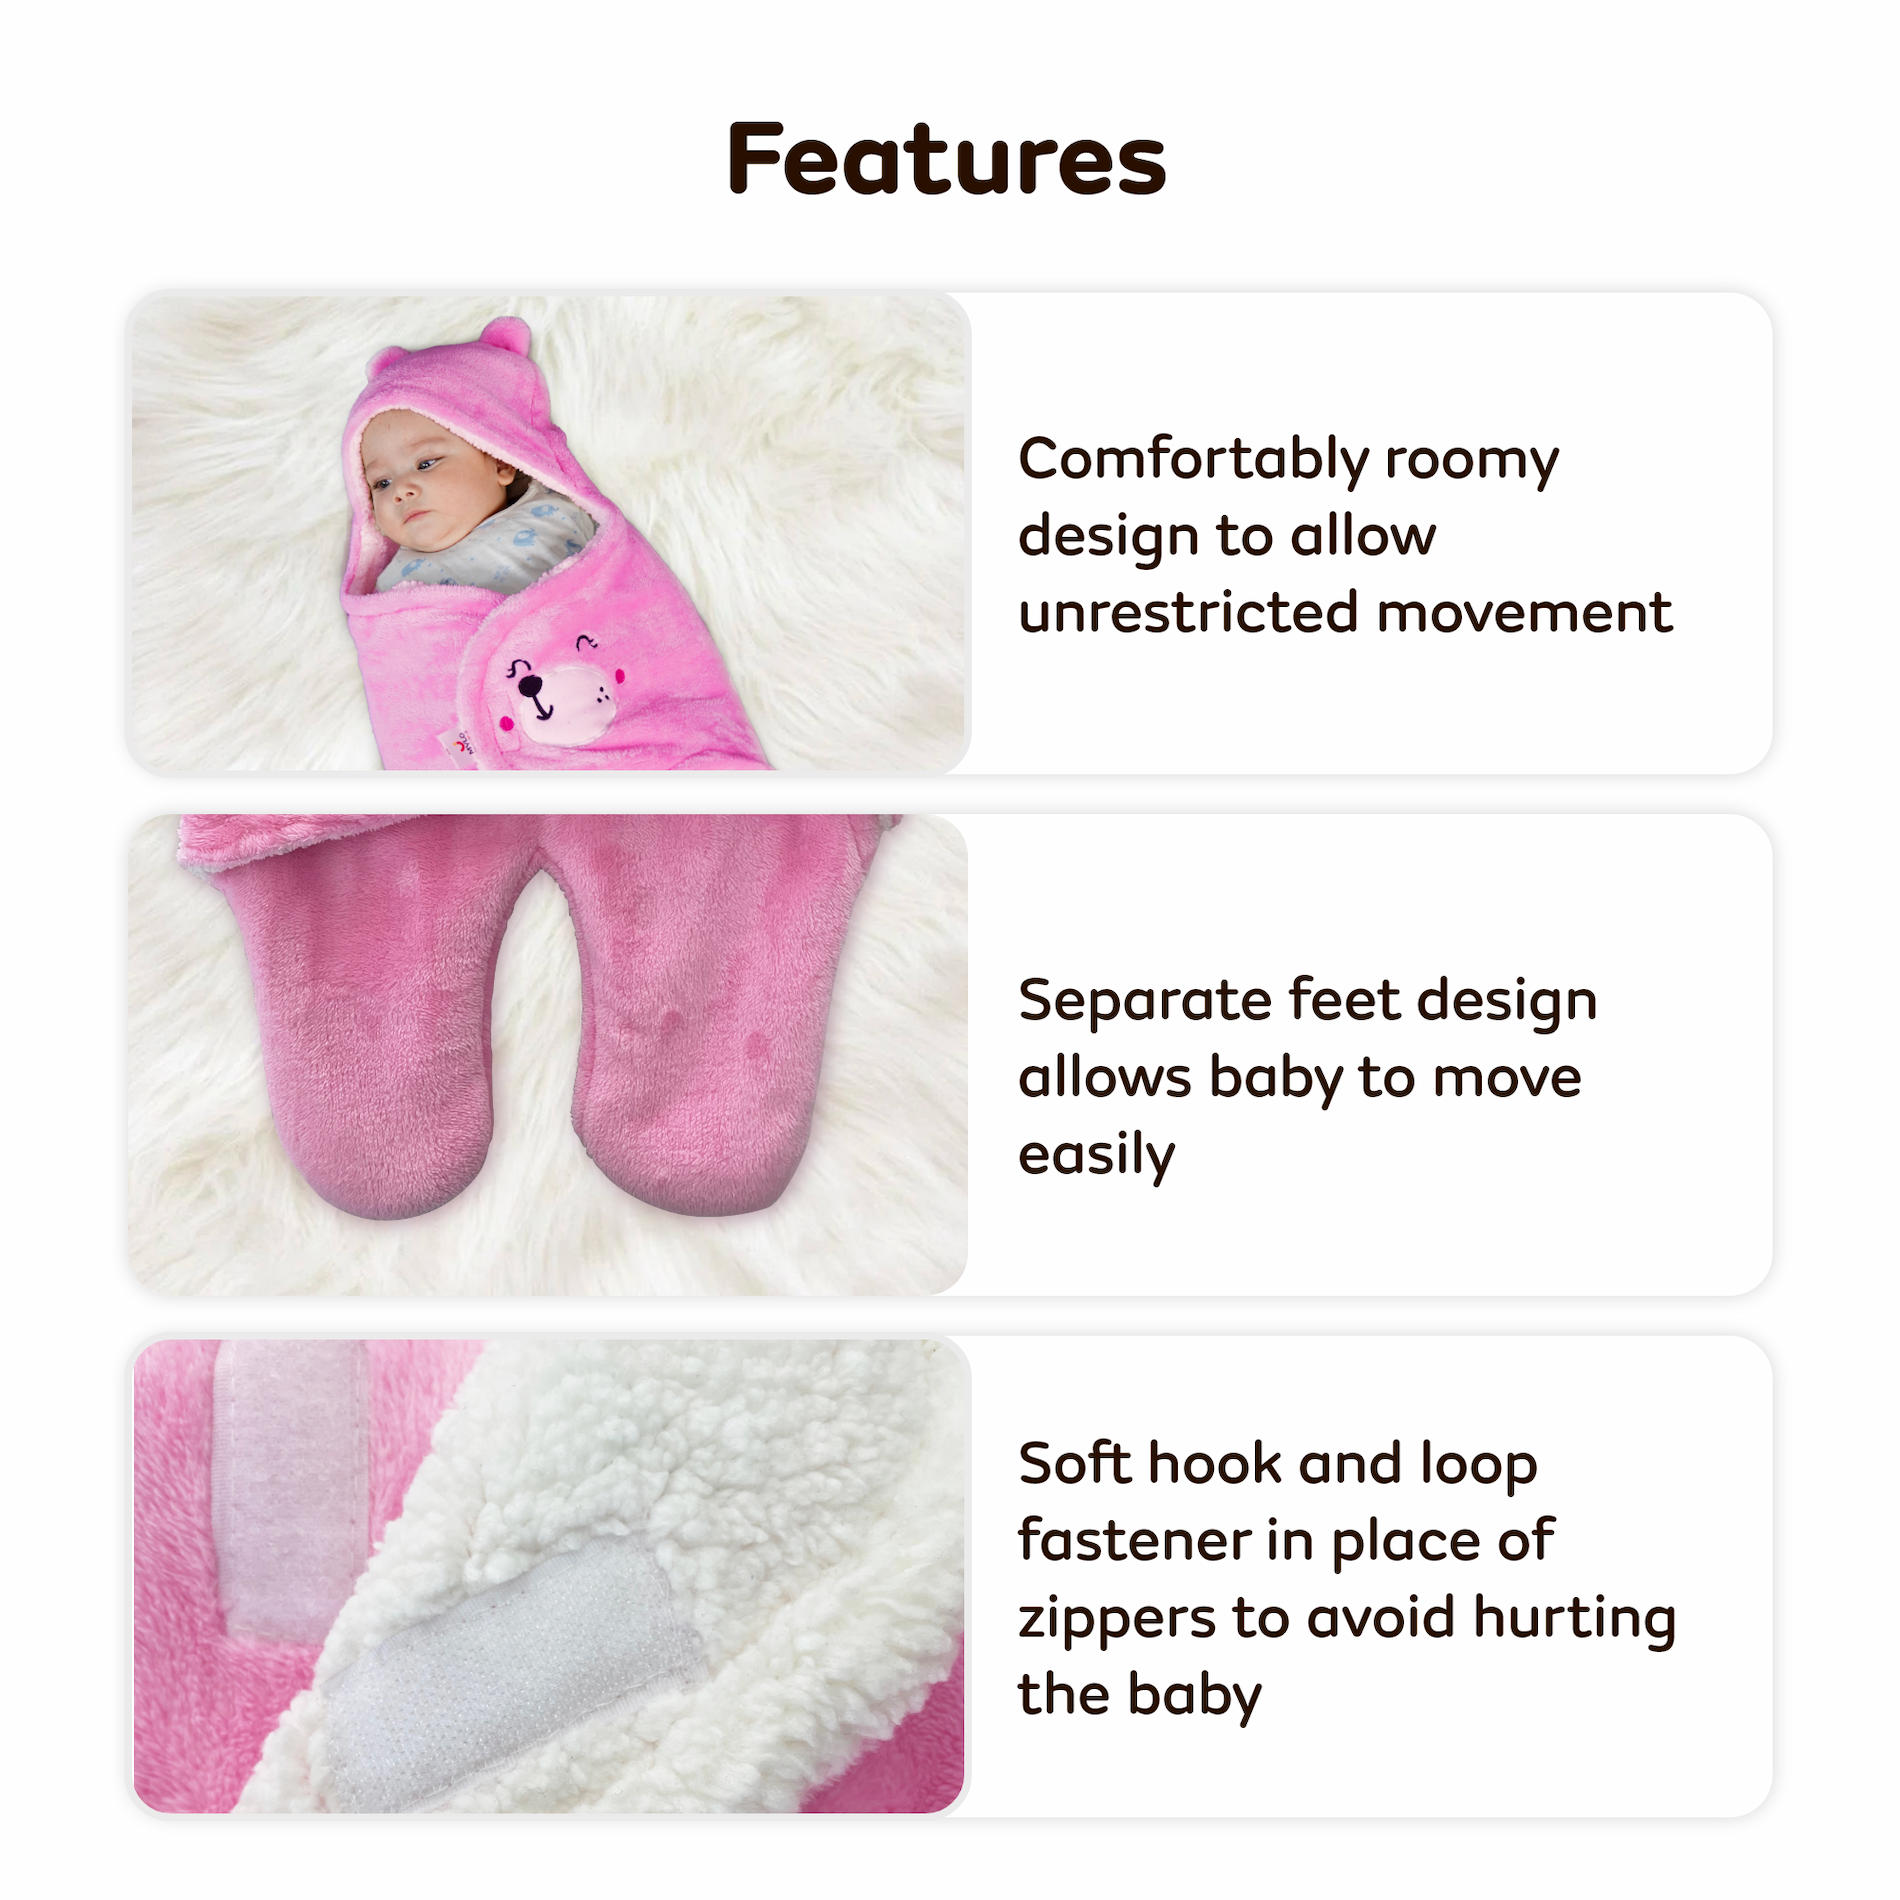 4-in-1 All Season Baby Swaddle-Wrapper For New Born Baby (0-6 months) - Light pink & Light Brown - pack of 2